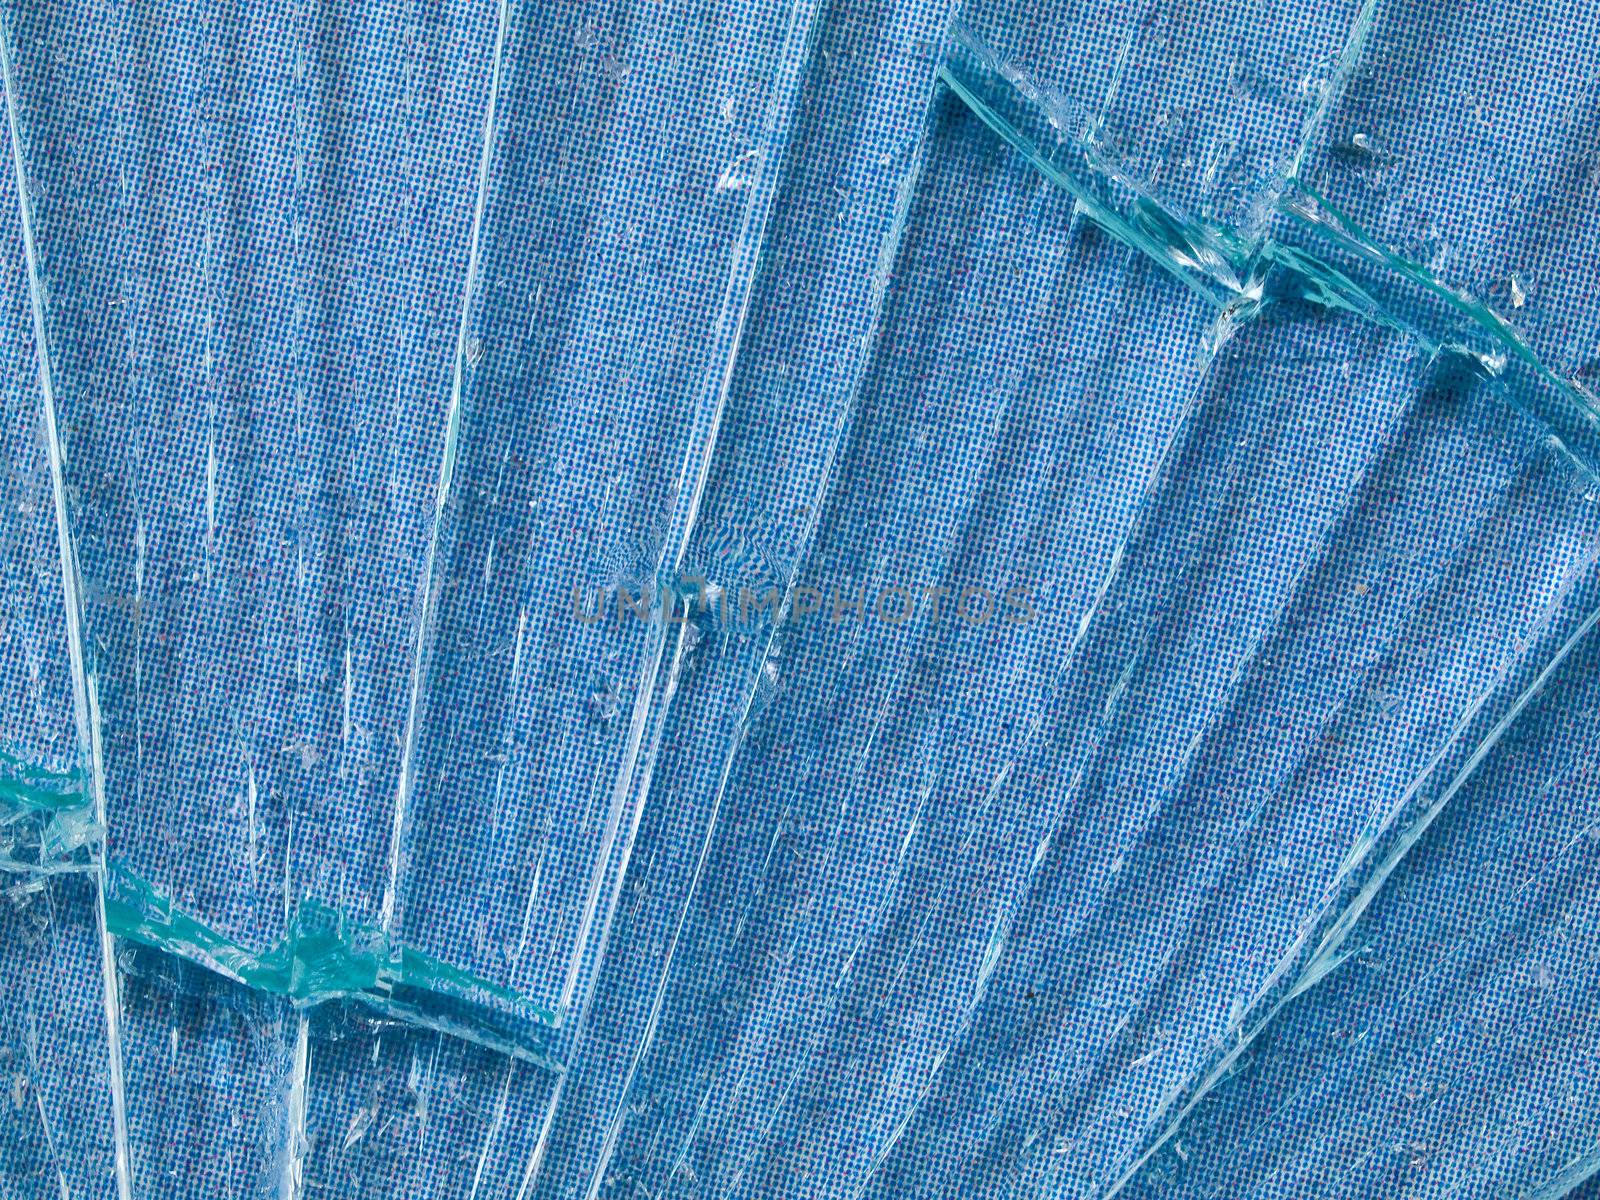 Cracked Glass Macro with a Sky Blue Patterned Background